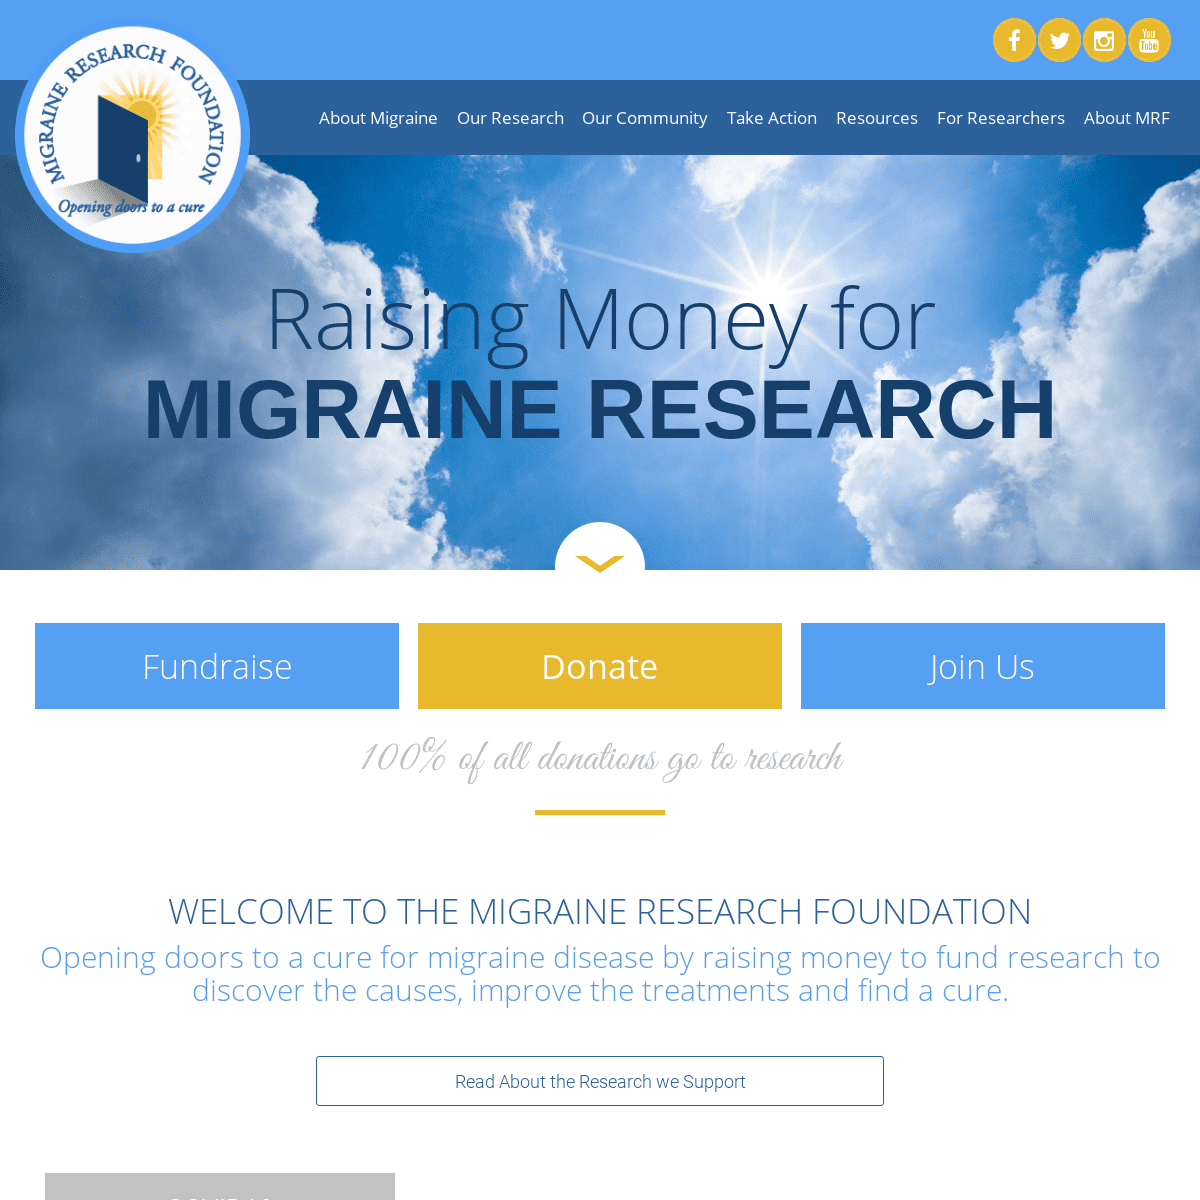 A complete backup of https://migraineresearchfoundation.org